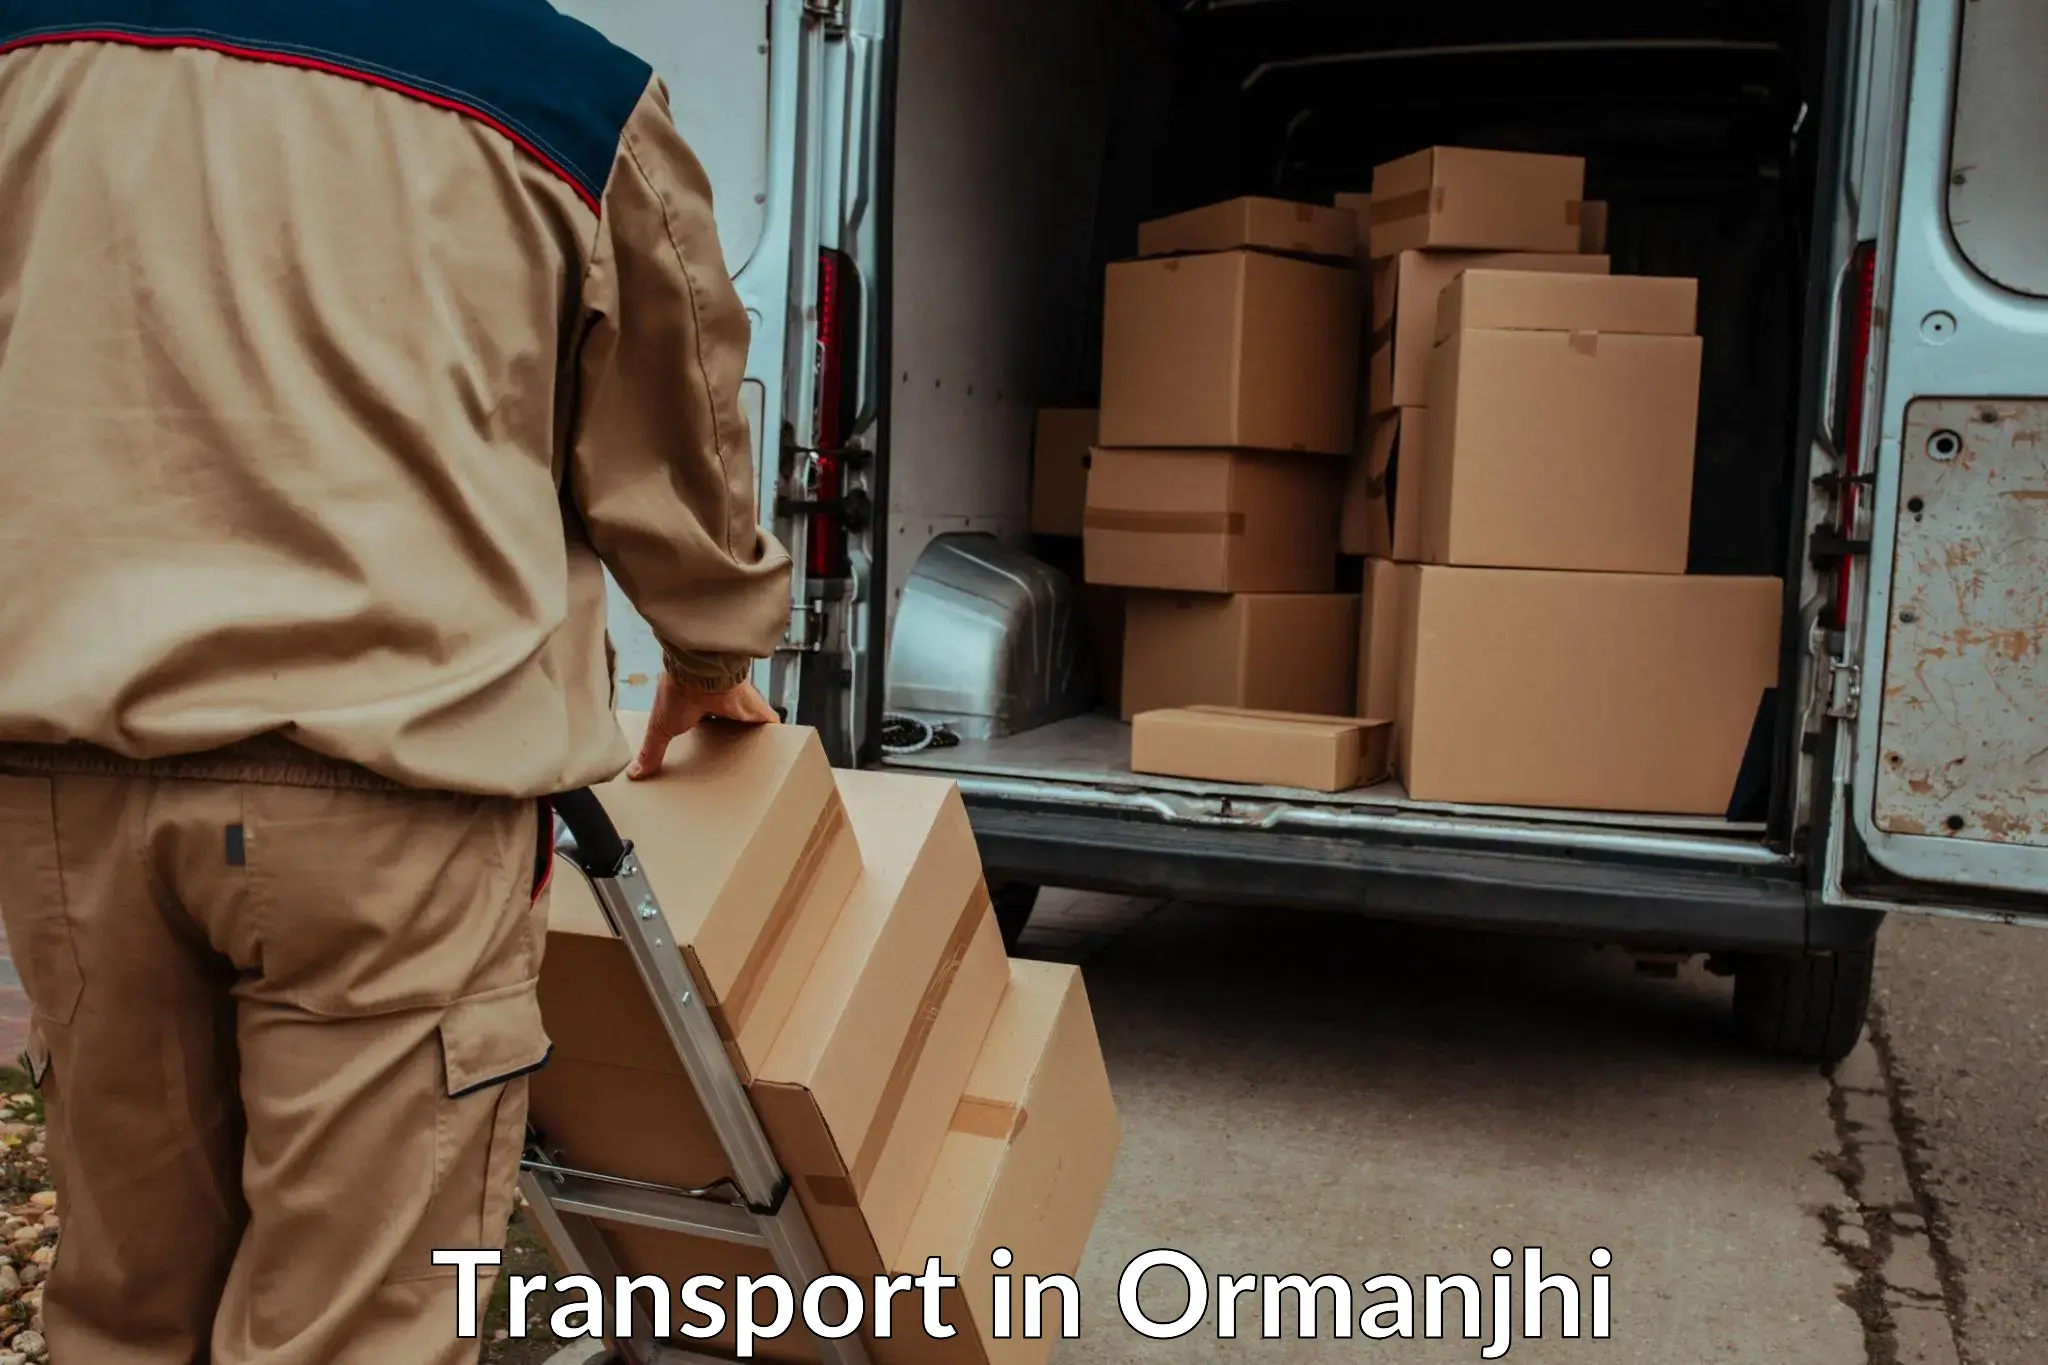 Express transport services in Ormanjhi